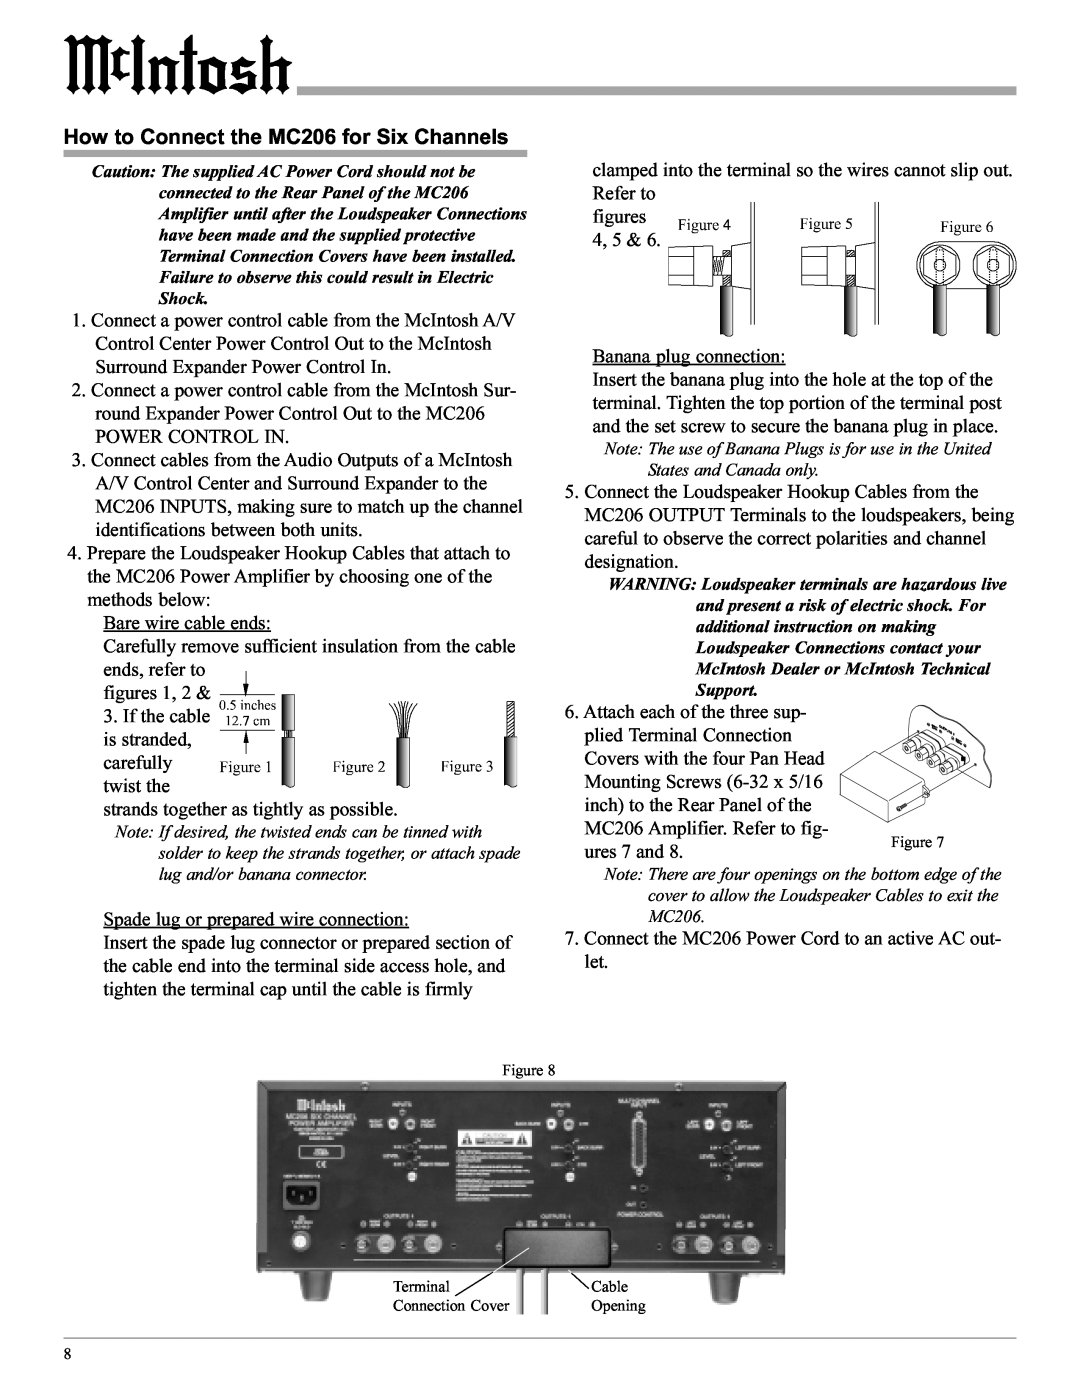 McIntosh manual How to Connect the MC206 for Six Channels 